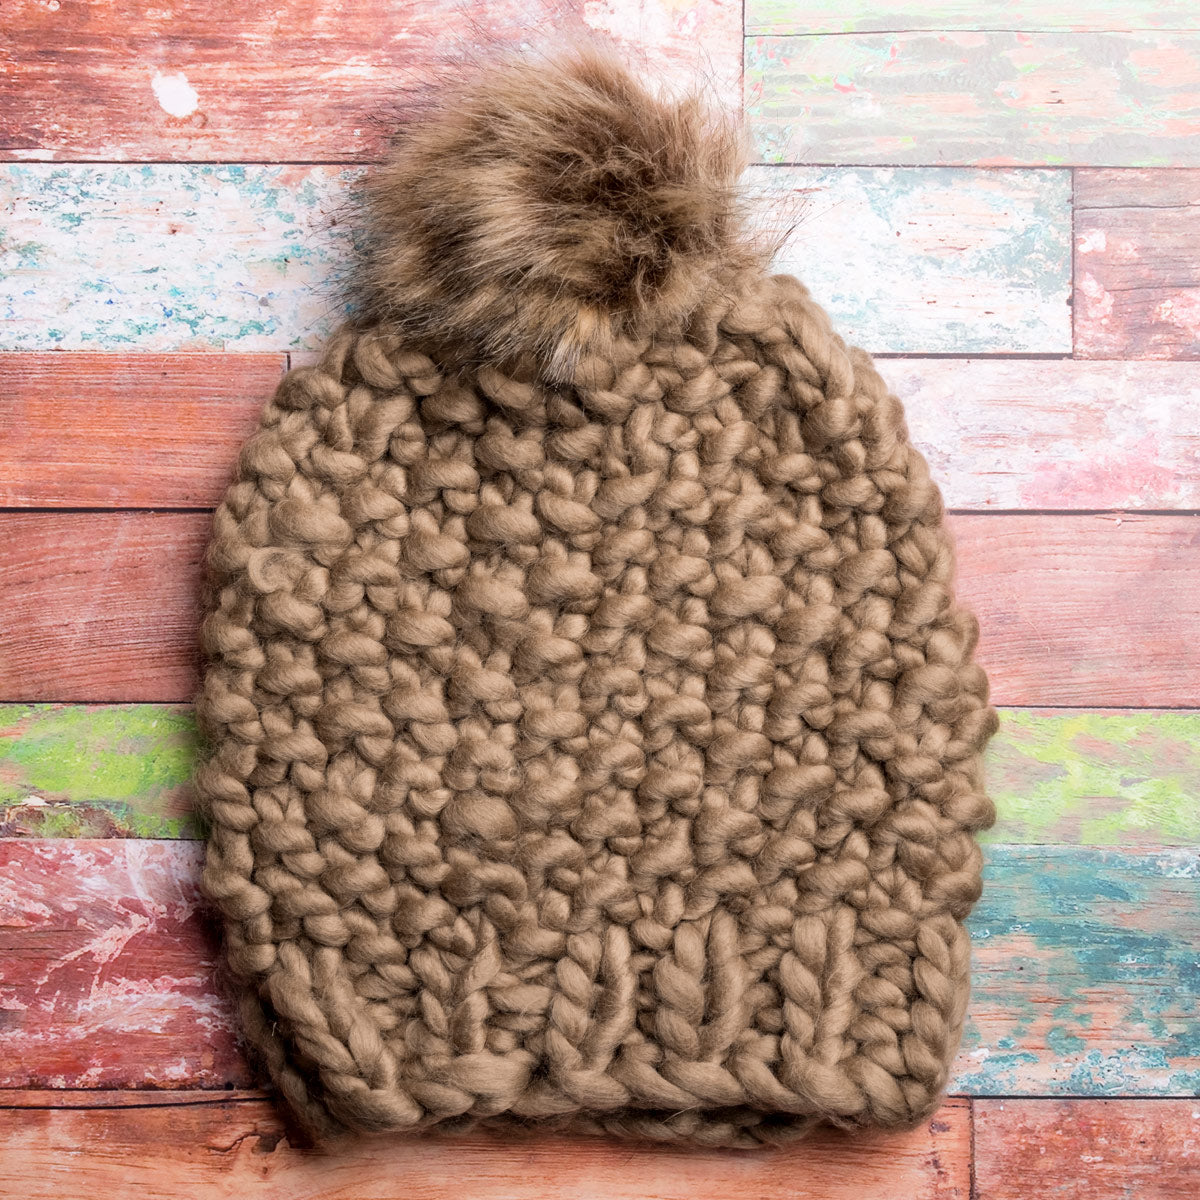 A generous faux fur pom-pom looks like real fur, on a colorful chunky knit hat.